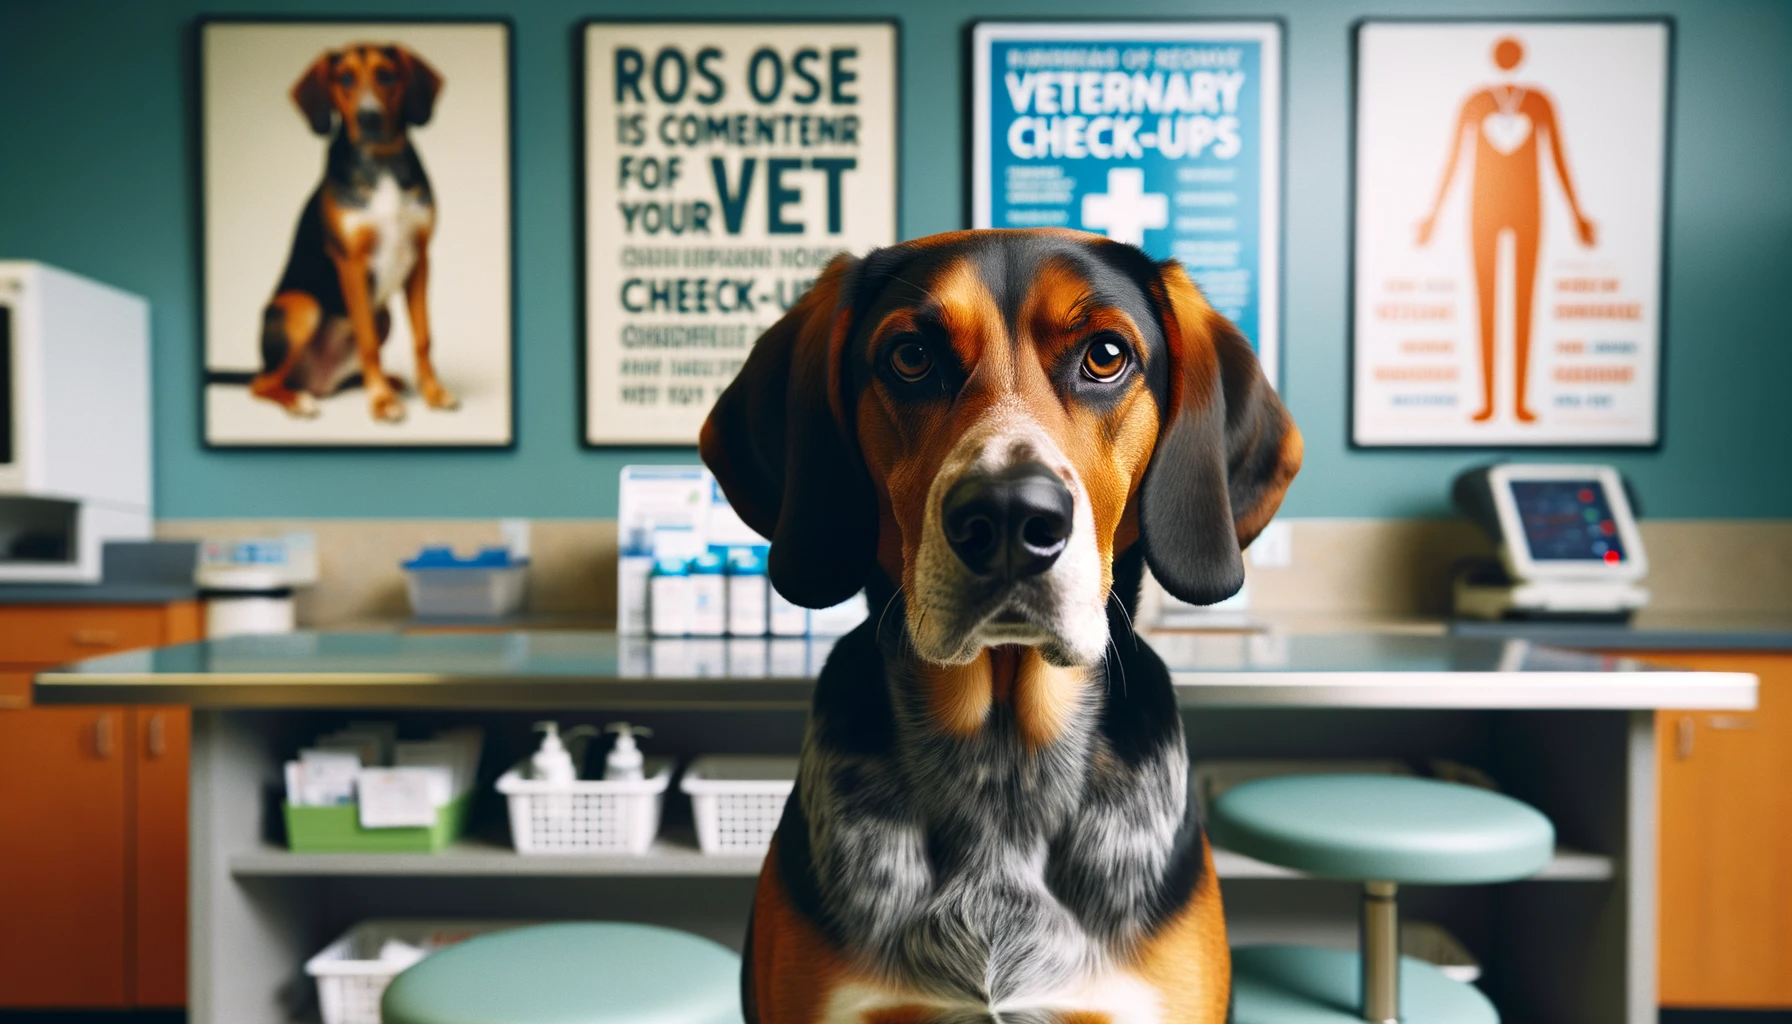 A Well-Behaved Coonhound Lab Mix Waiting Patiently for Its Vet Check-up, Illustrating the Importance of Regular Veterinary Visits